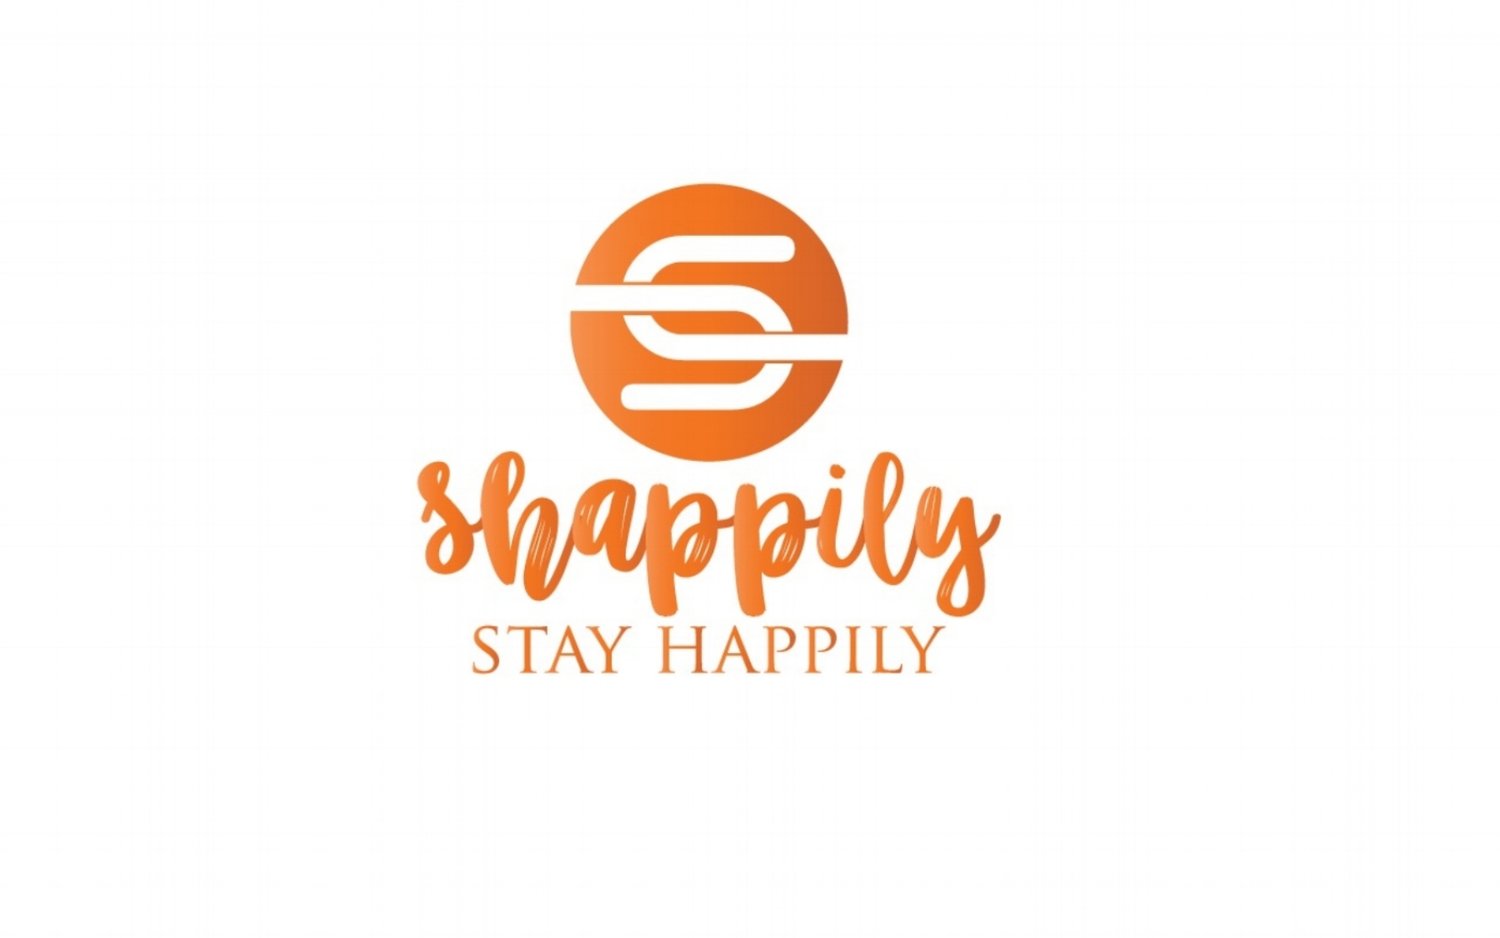 Shappily